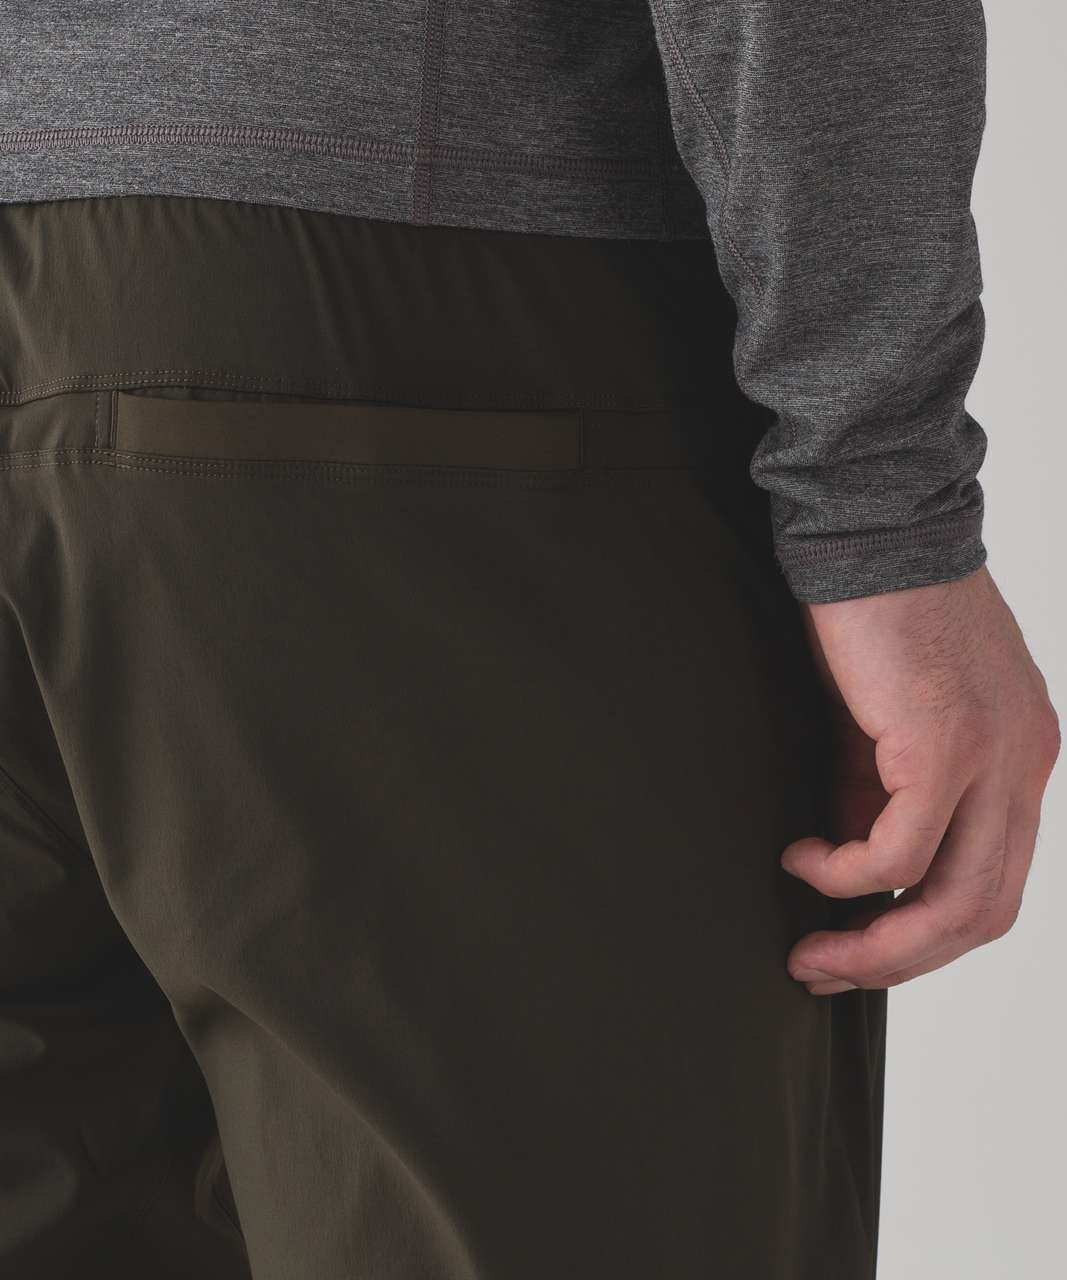 Lululemon Great Wall Pant *32" - Dark Olive (First Release)